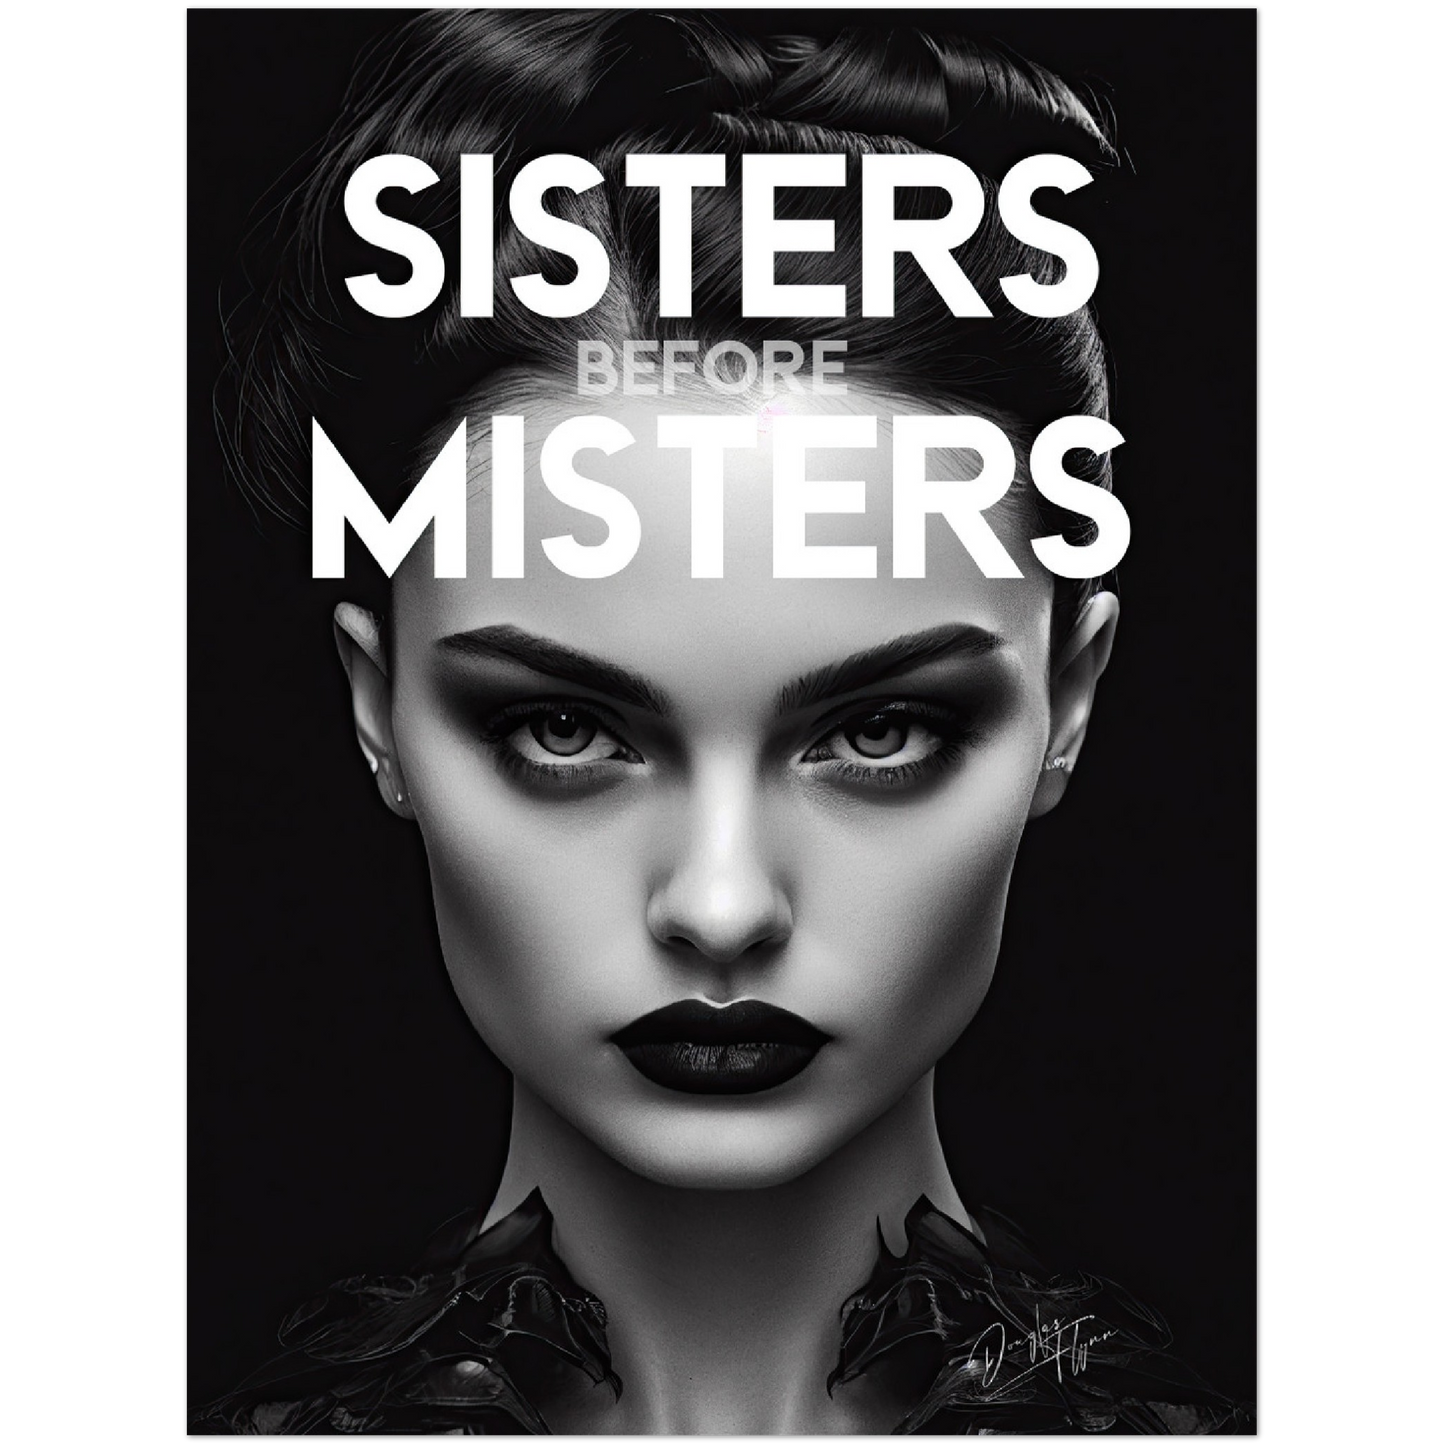 »Sisters Before Misters« retro poster